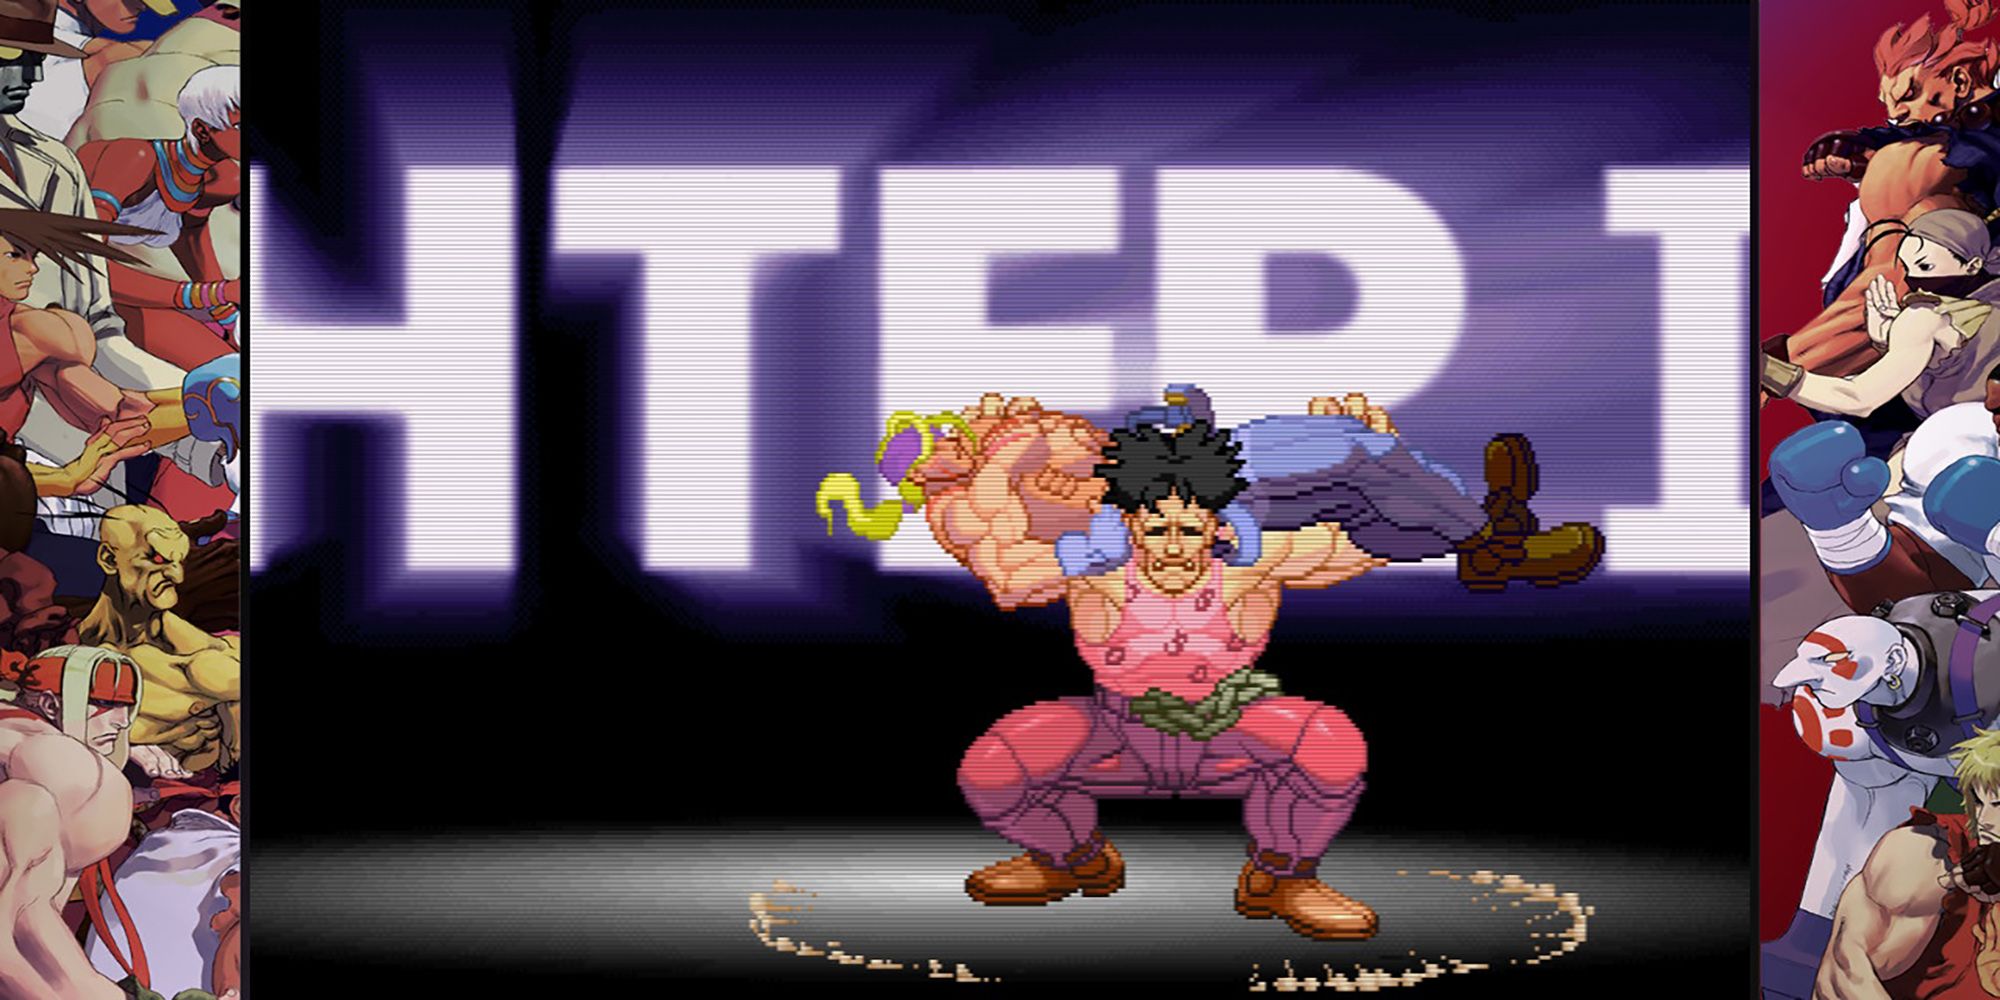 Hugo backbreaks Alex in front of a lit up logo in the Street Fighter 3: 2nd Impact intro.